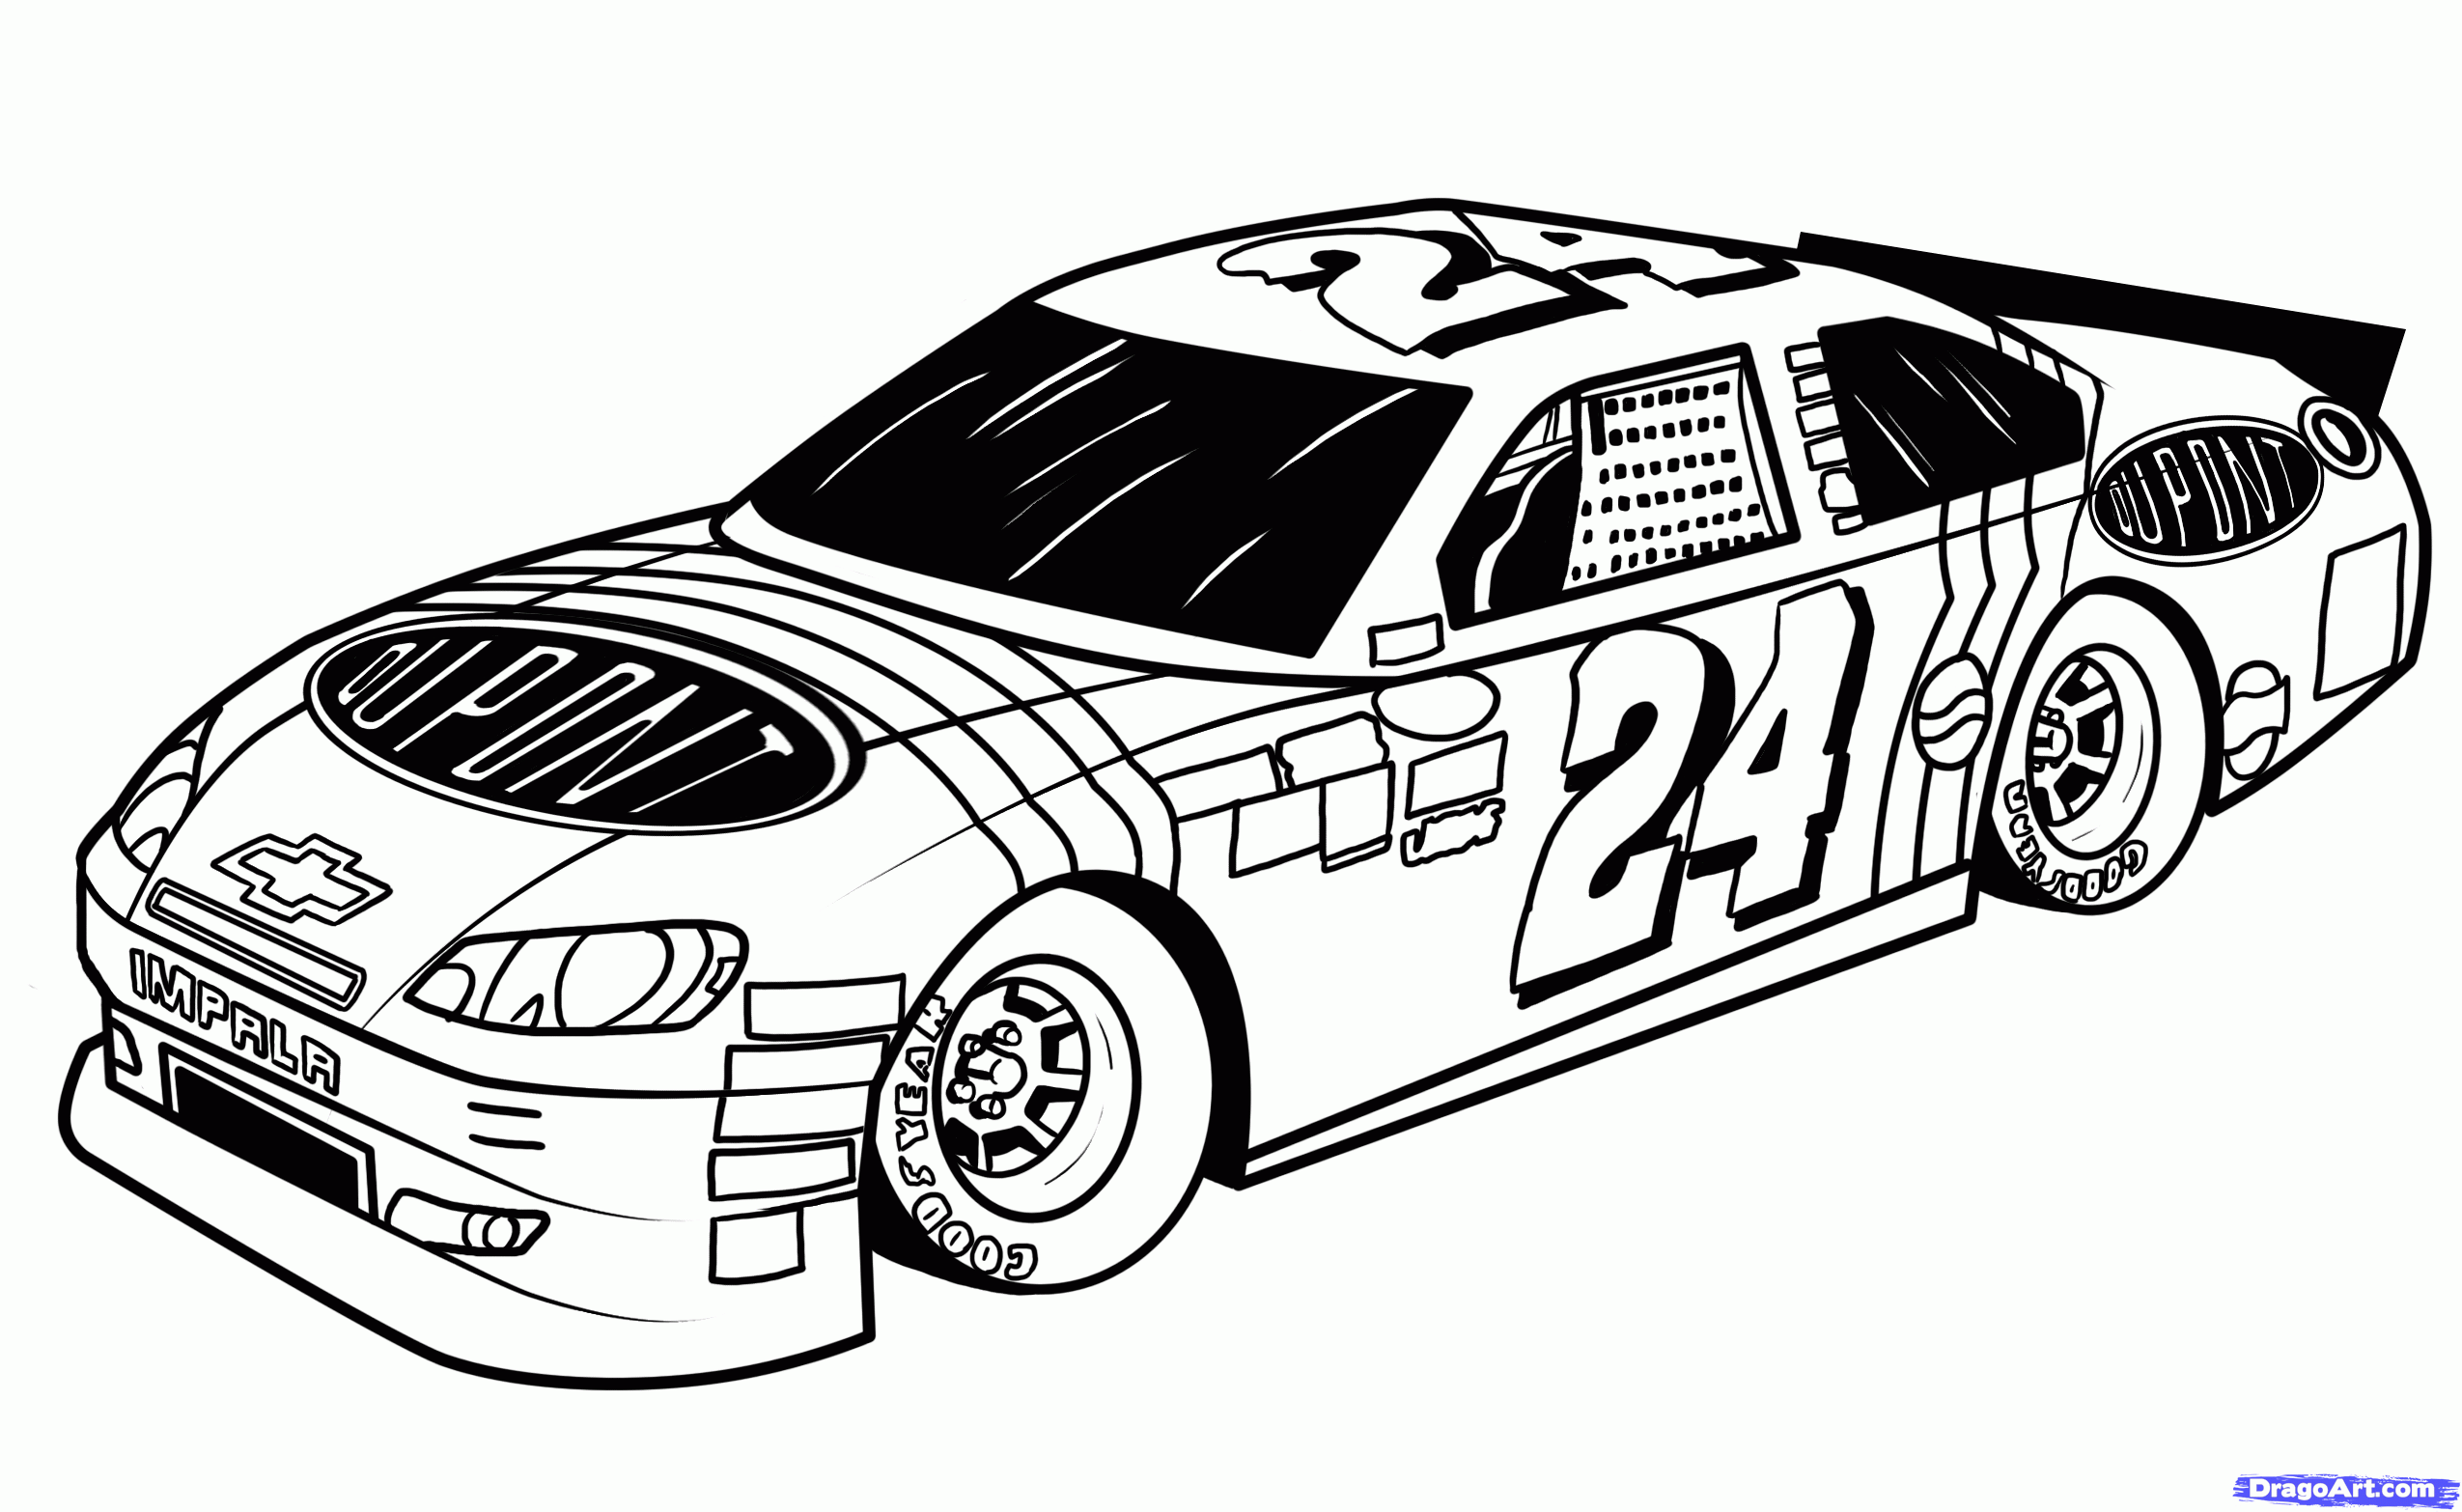 Great How To Draw A Nascar Car Step By Step of all time Don t miss out 